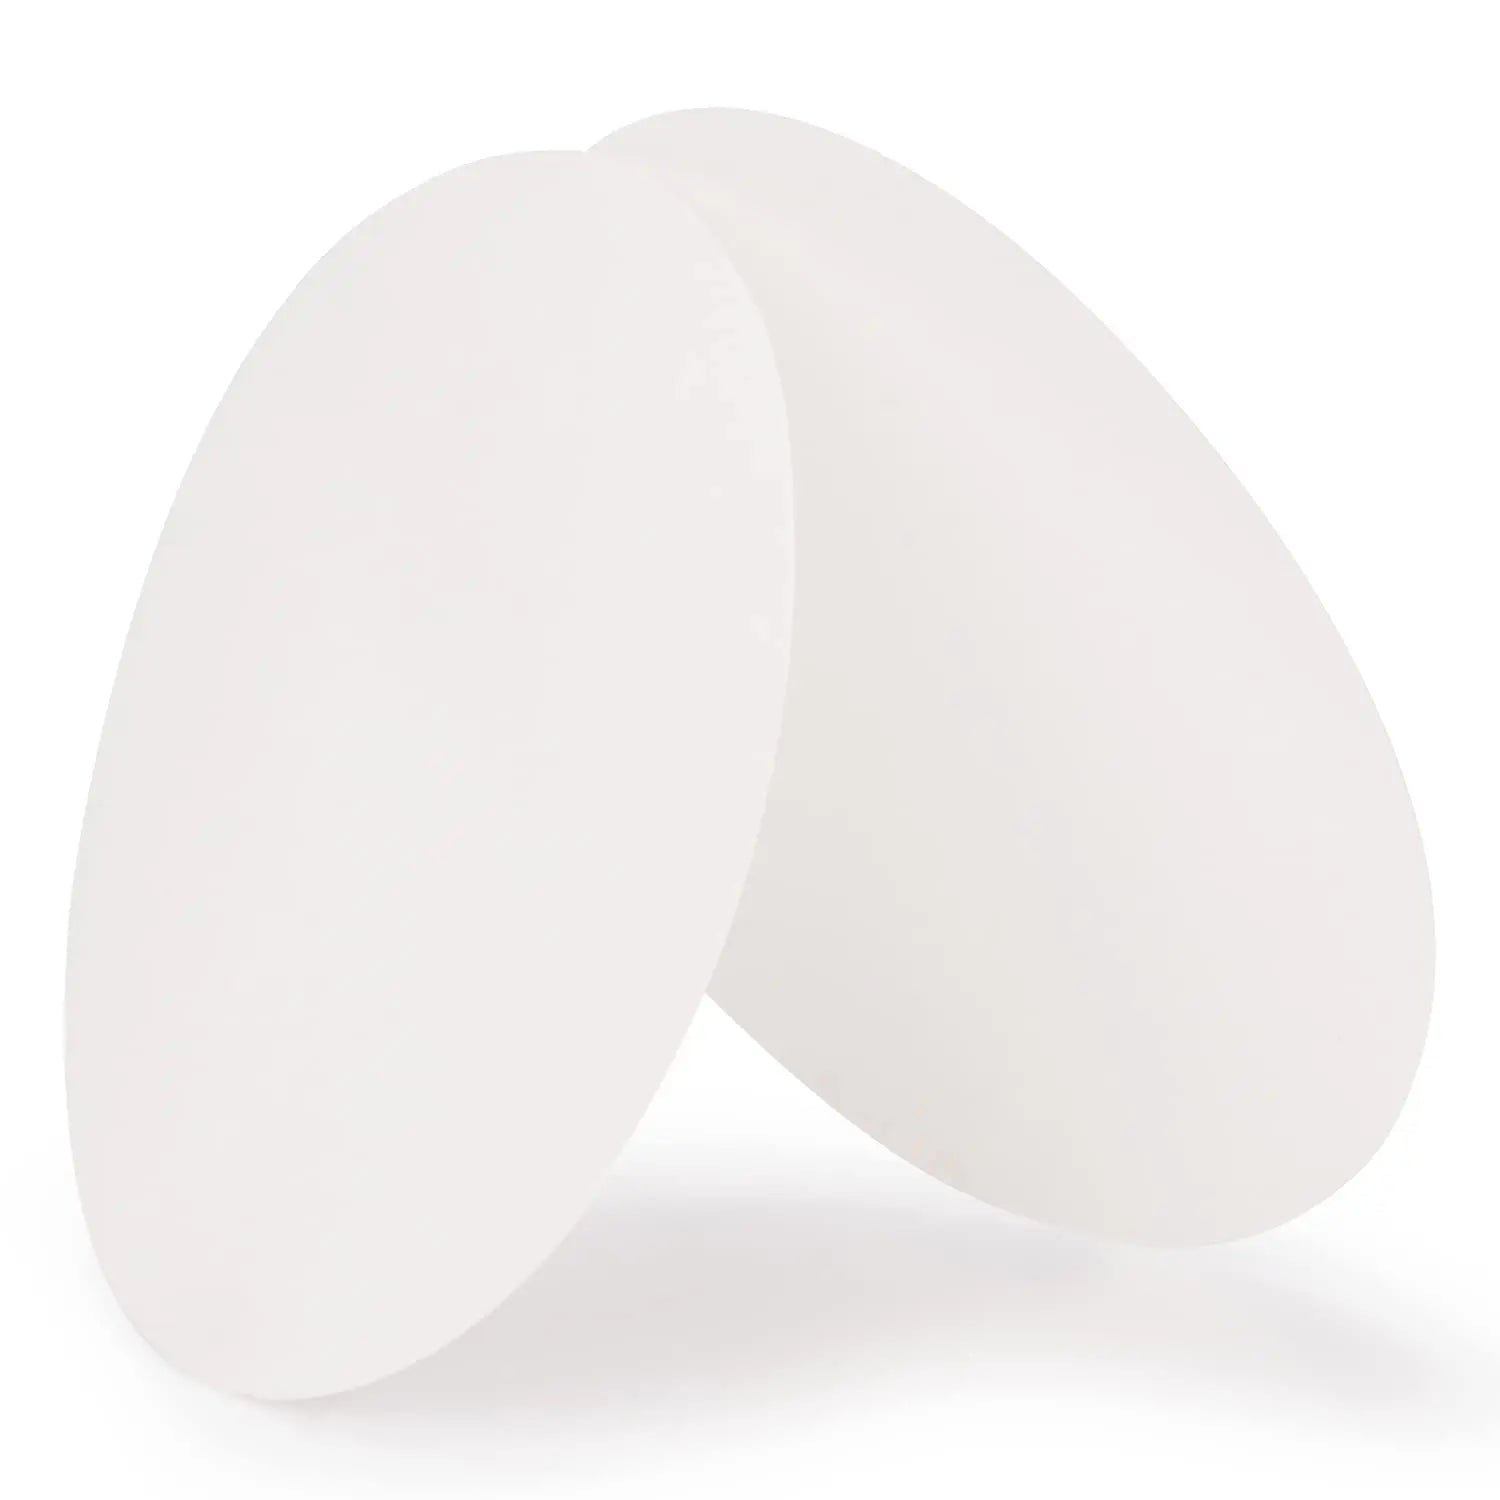 Nylon Membrane Filters, 0.45 |ìm Pore Size and 94 mm Diameter Filter Papers